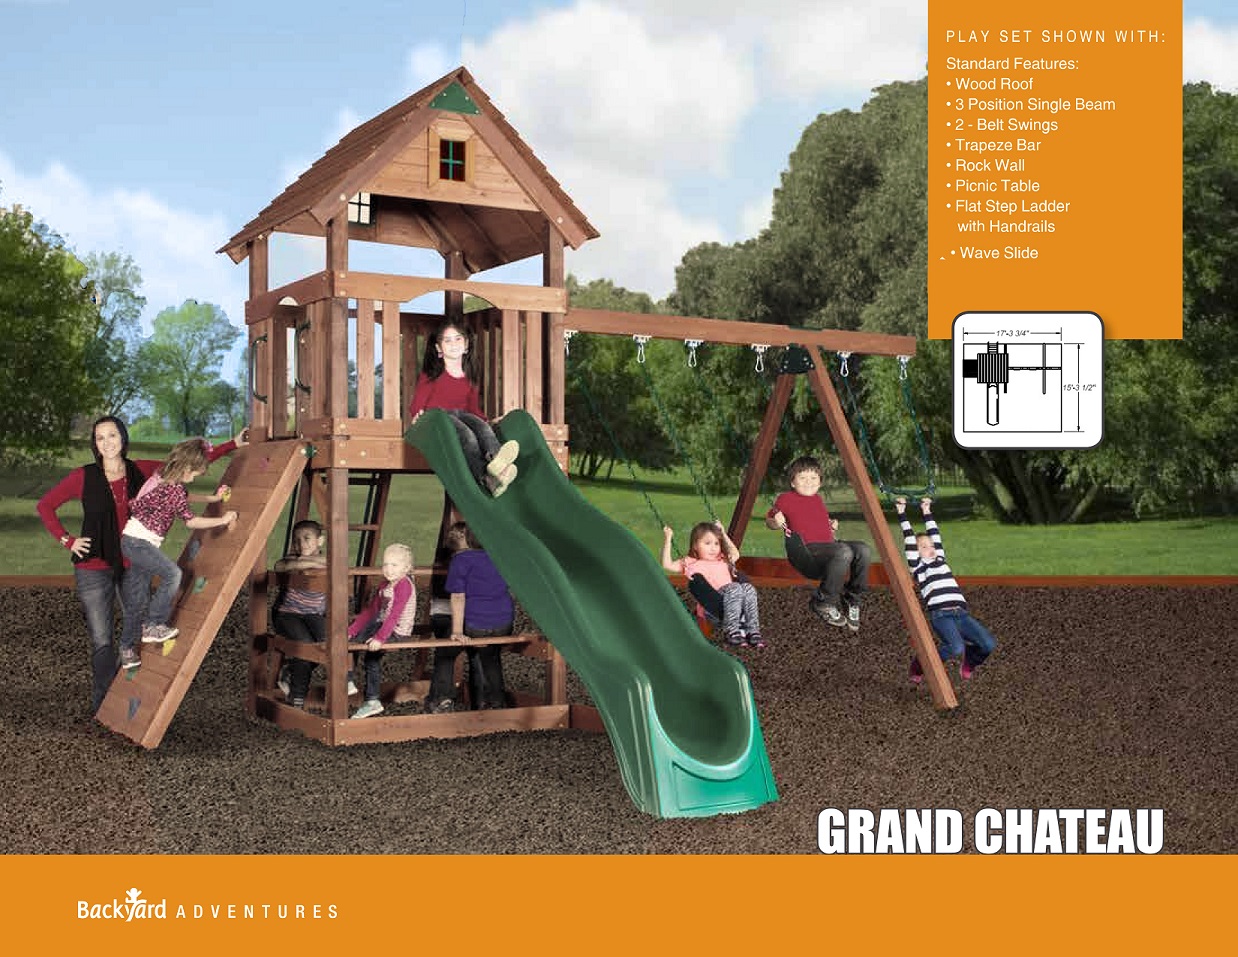 Backyard Adventures Play Sets - GranD Chateau Flyer EDiteD2